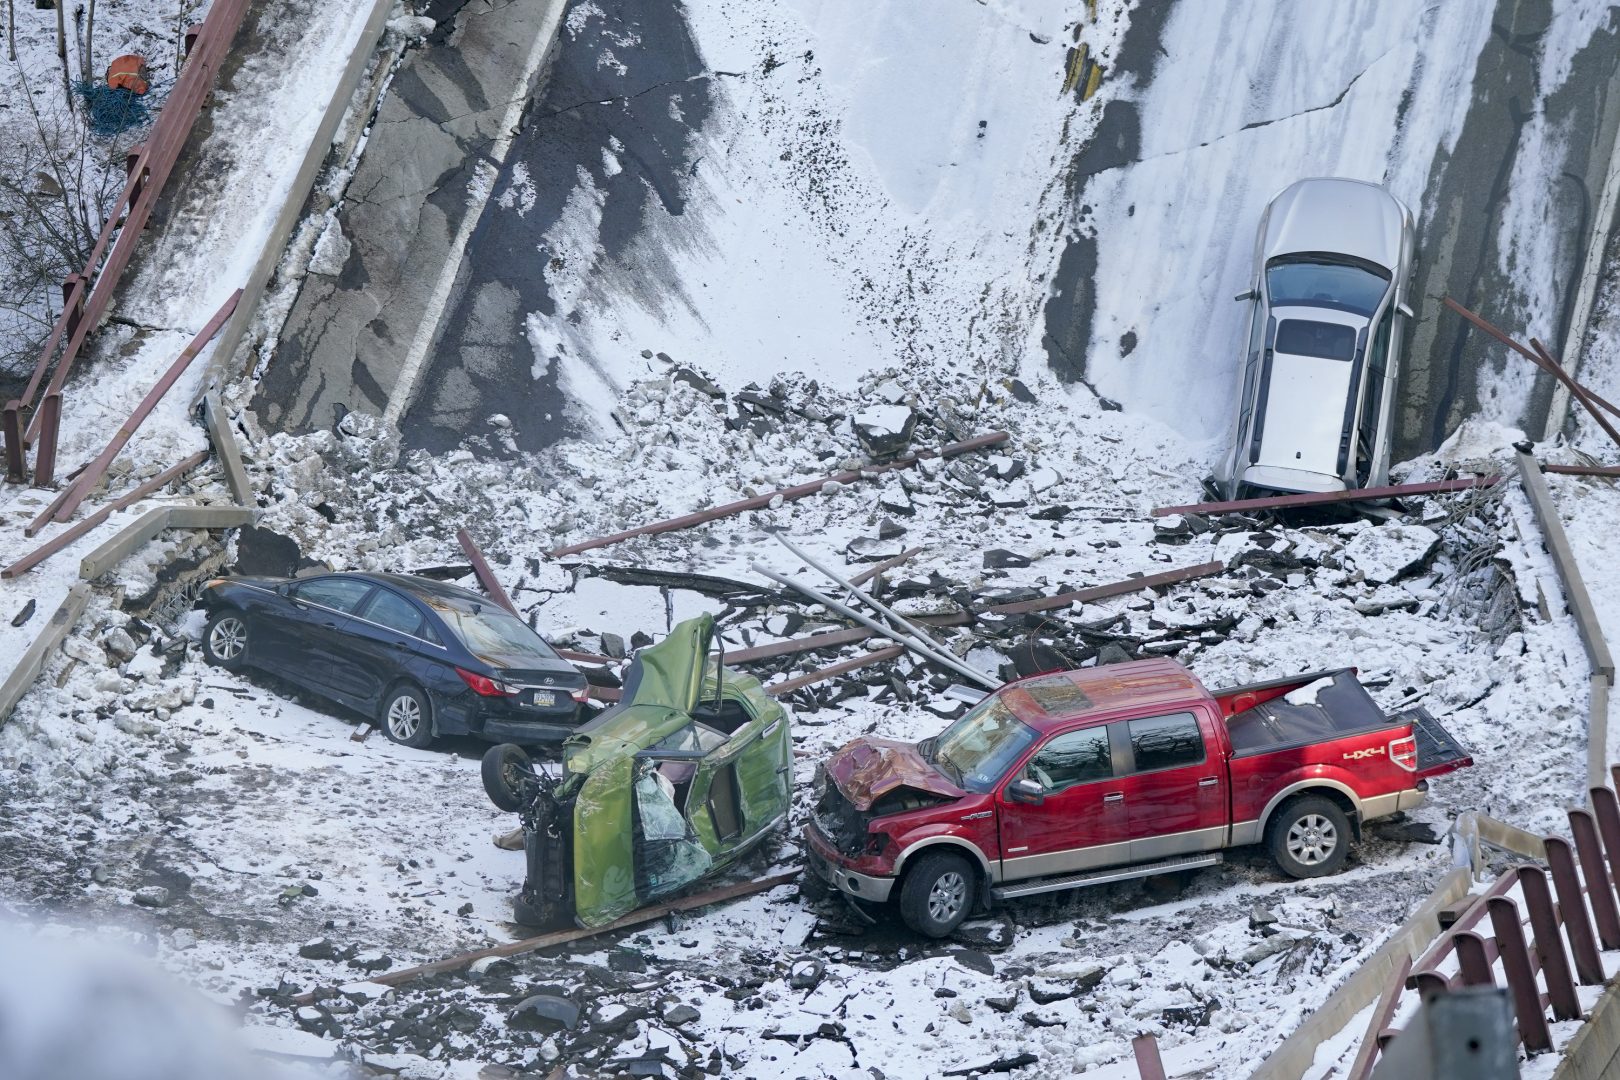 Vehicles that were on a bridge when it collapsed Friday are seen in the rubble during the recovery process on Monday, Jan. 31, 2022 in Pittsburgh's East End. (AP Photo/Gene J. Puskar)